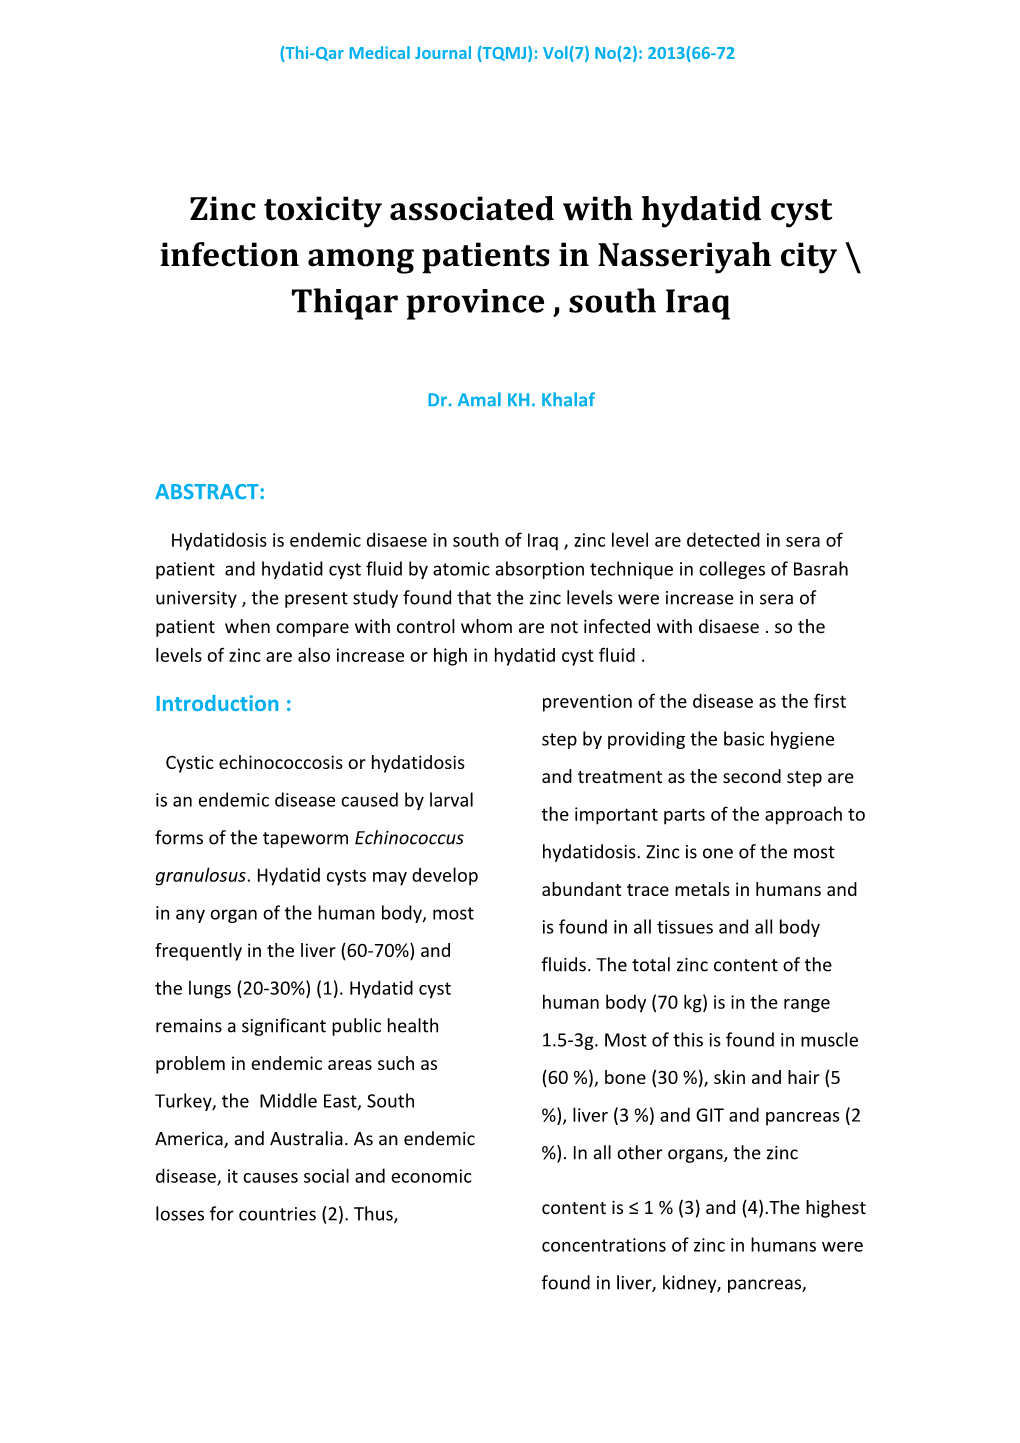 Zinc Toxicity Associated with Hydatid Cyst Infection Among Patients in Nasseriyah City